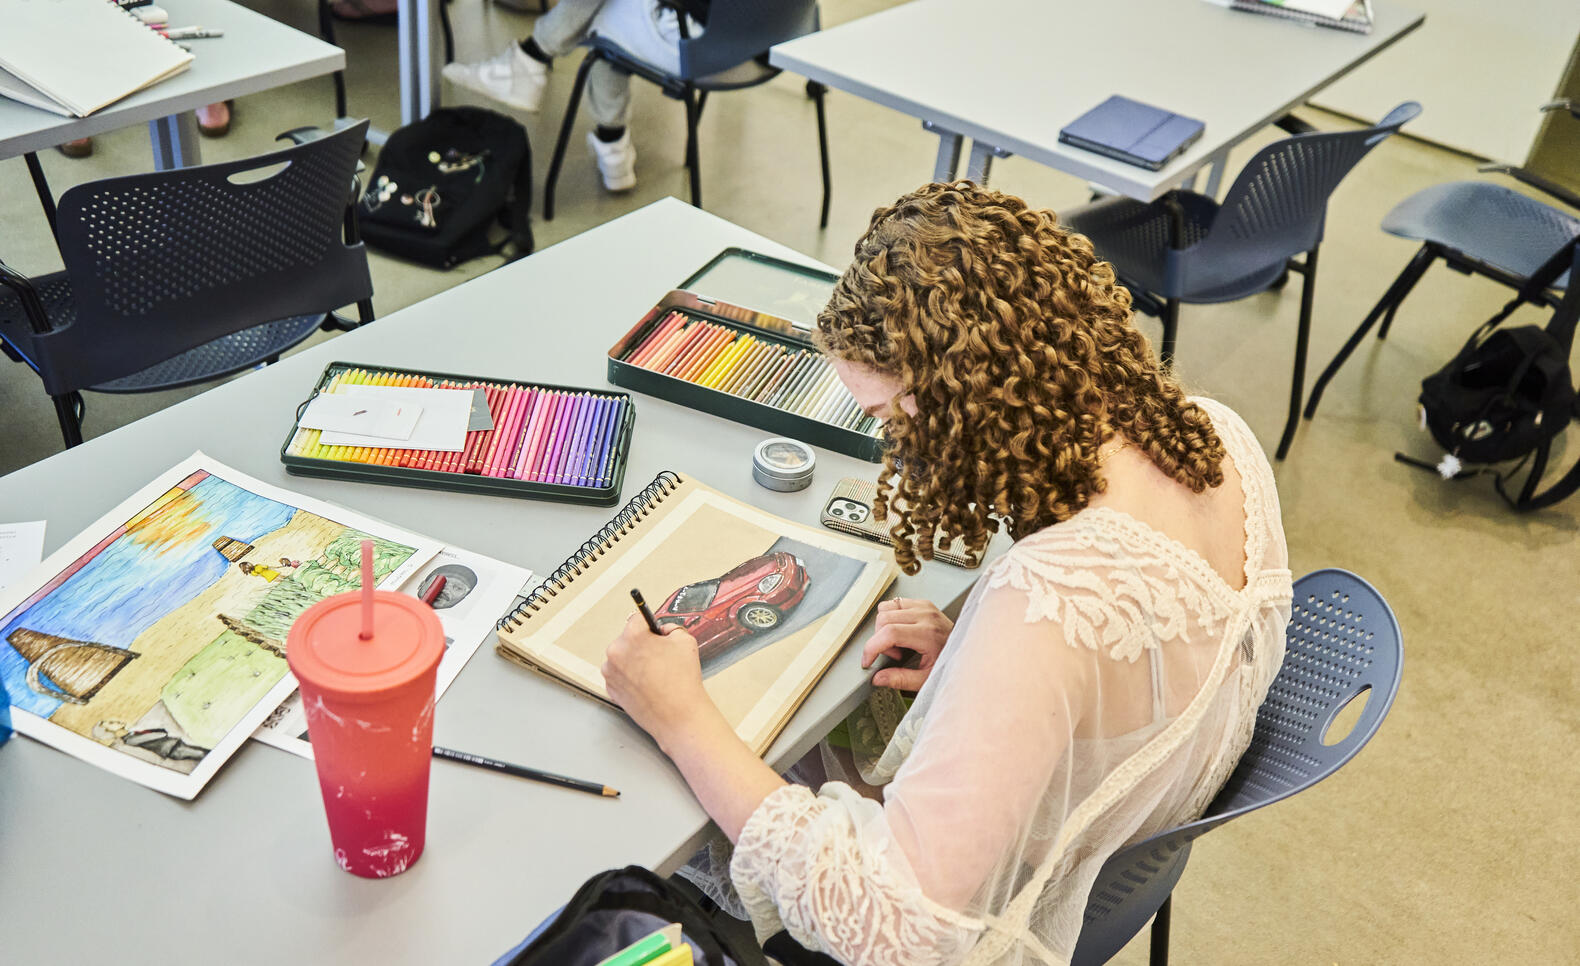 Student works at a table on colorful drawings in colored pencil with two colored pencil sets on the table.